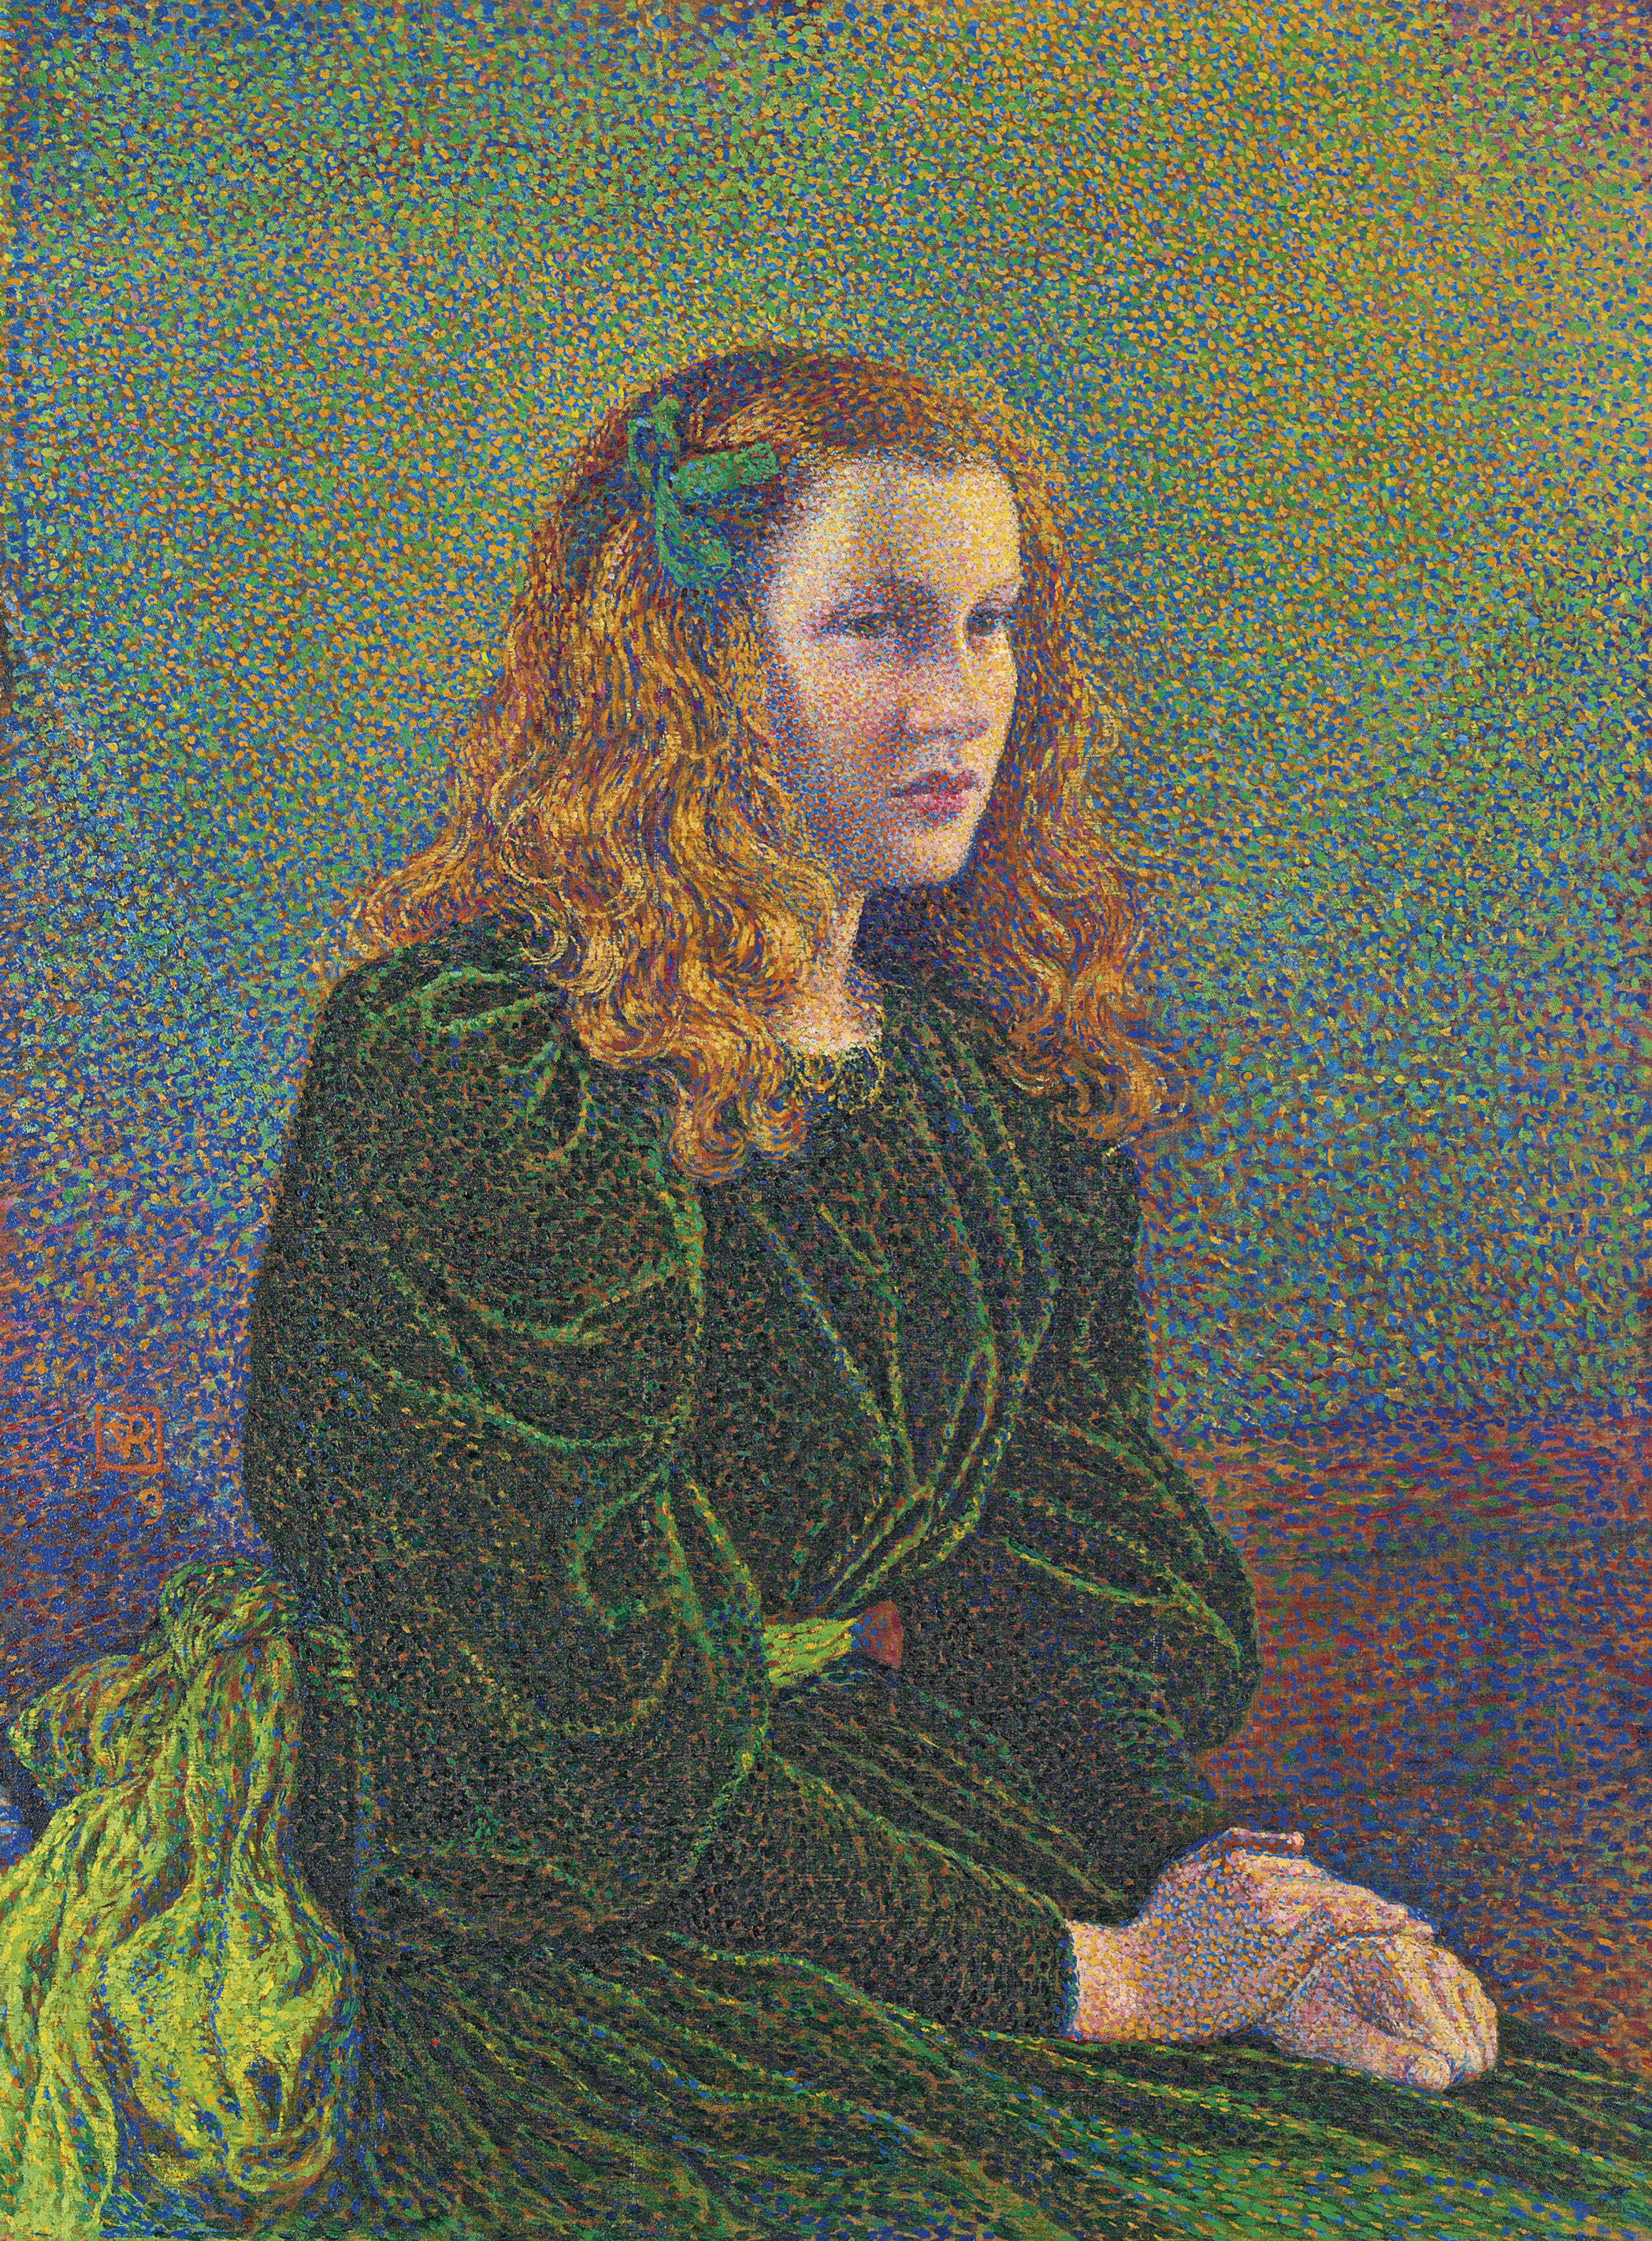 Young Woman in Green Dress (Germaine Maréchal) by Theo van Rysselberghe - 1893 - 81.7 x 60.6 cm private collection